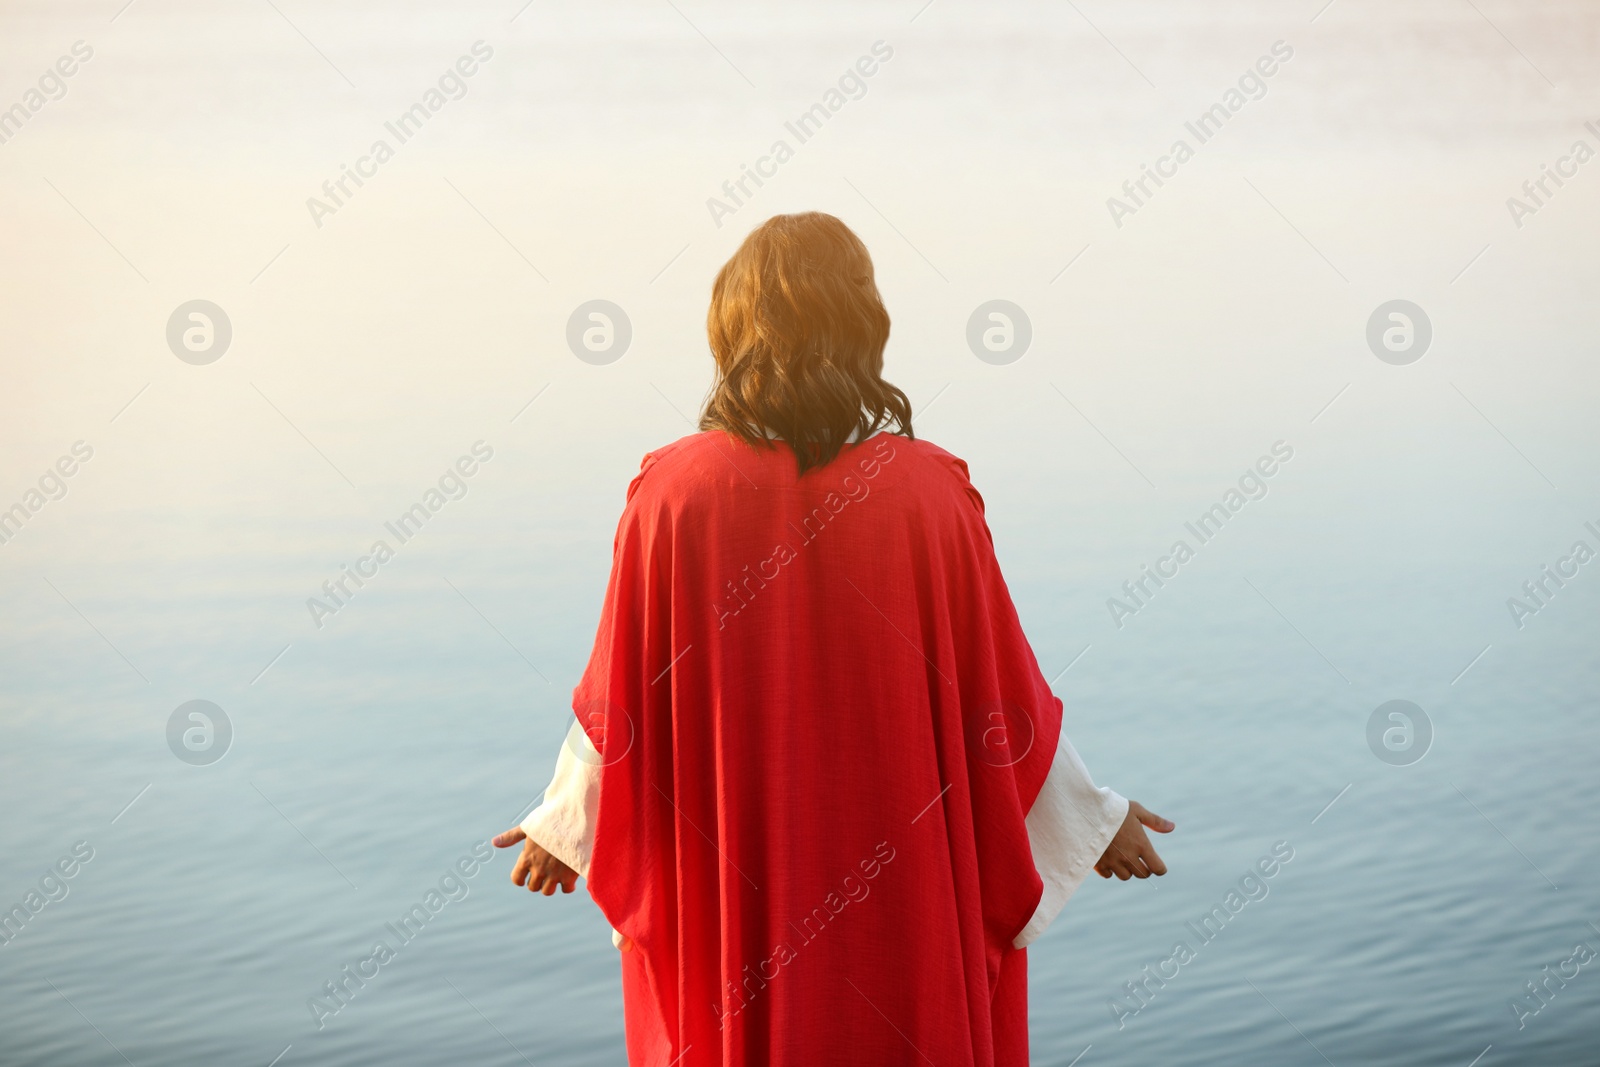 Photo of Jesus Christ near water outdoors, back view